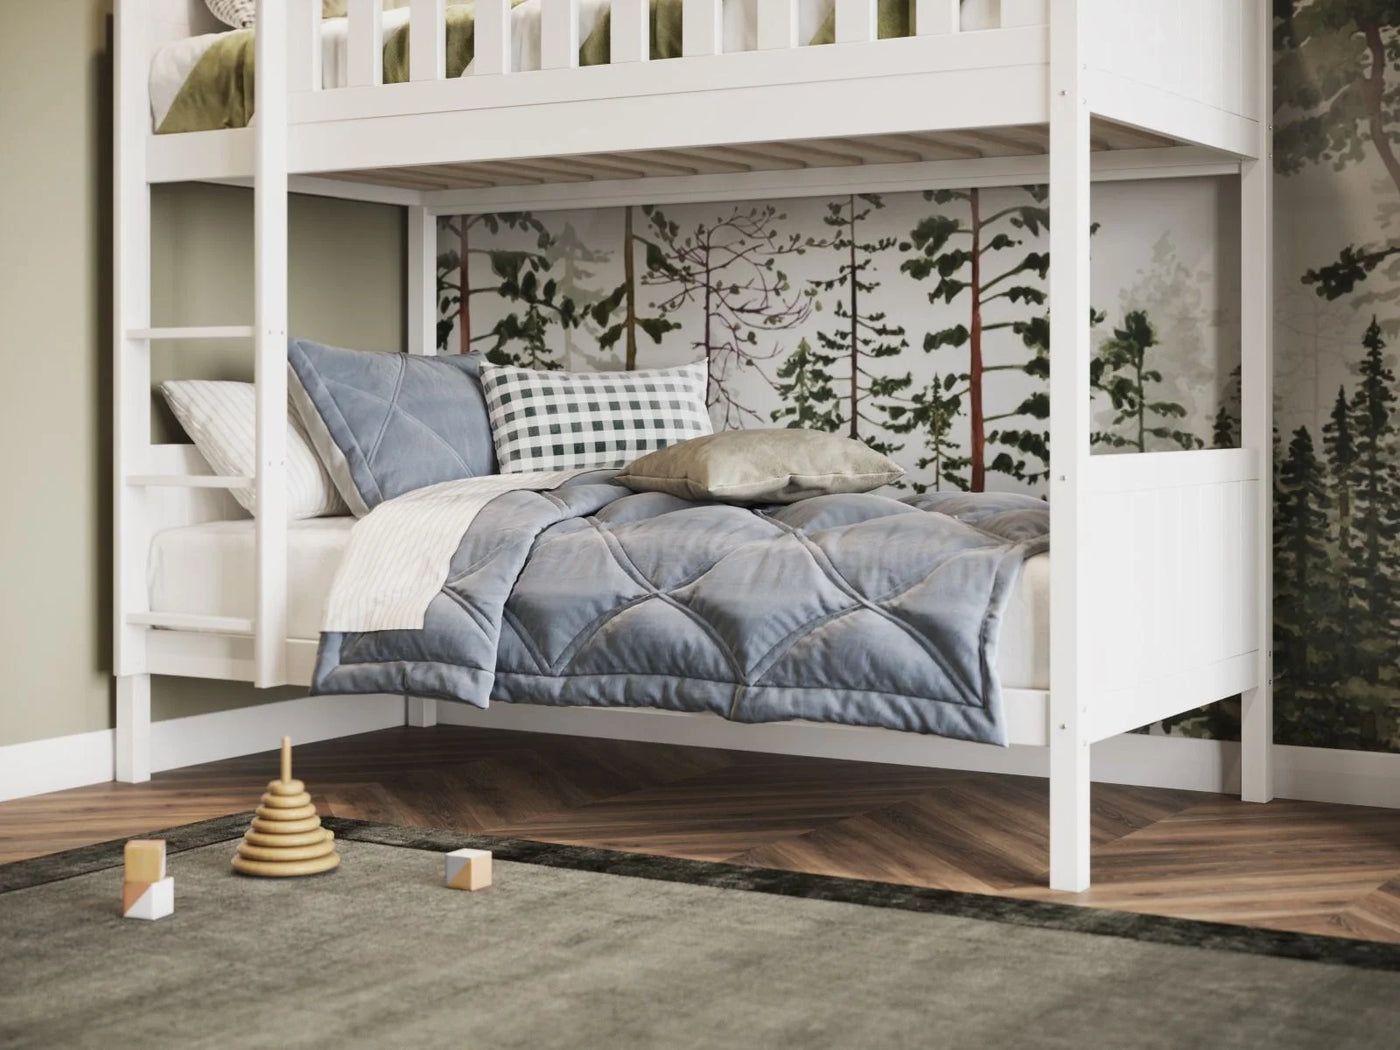 Flair-Bea-Wooden-Bunk-Bed-white_5